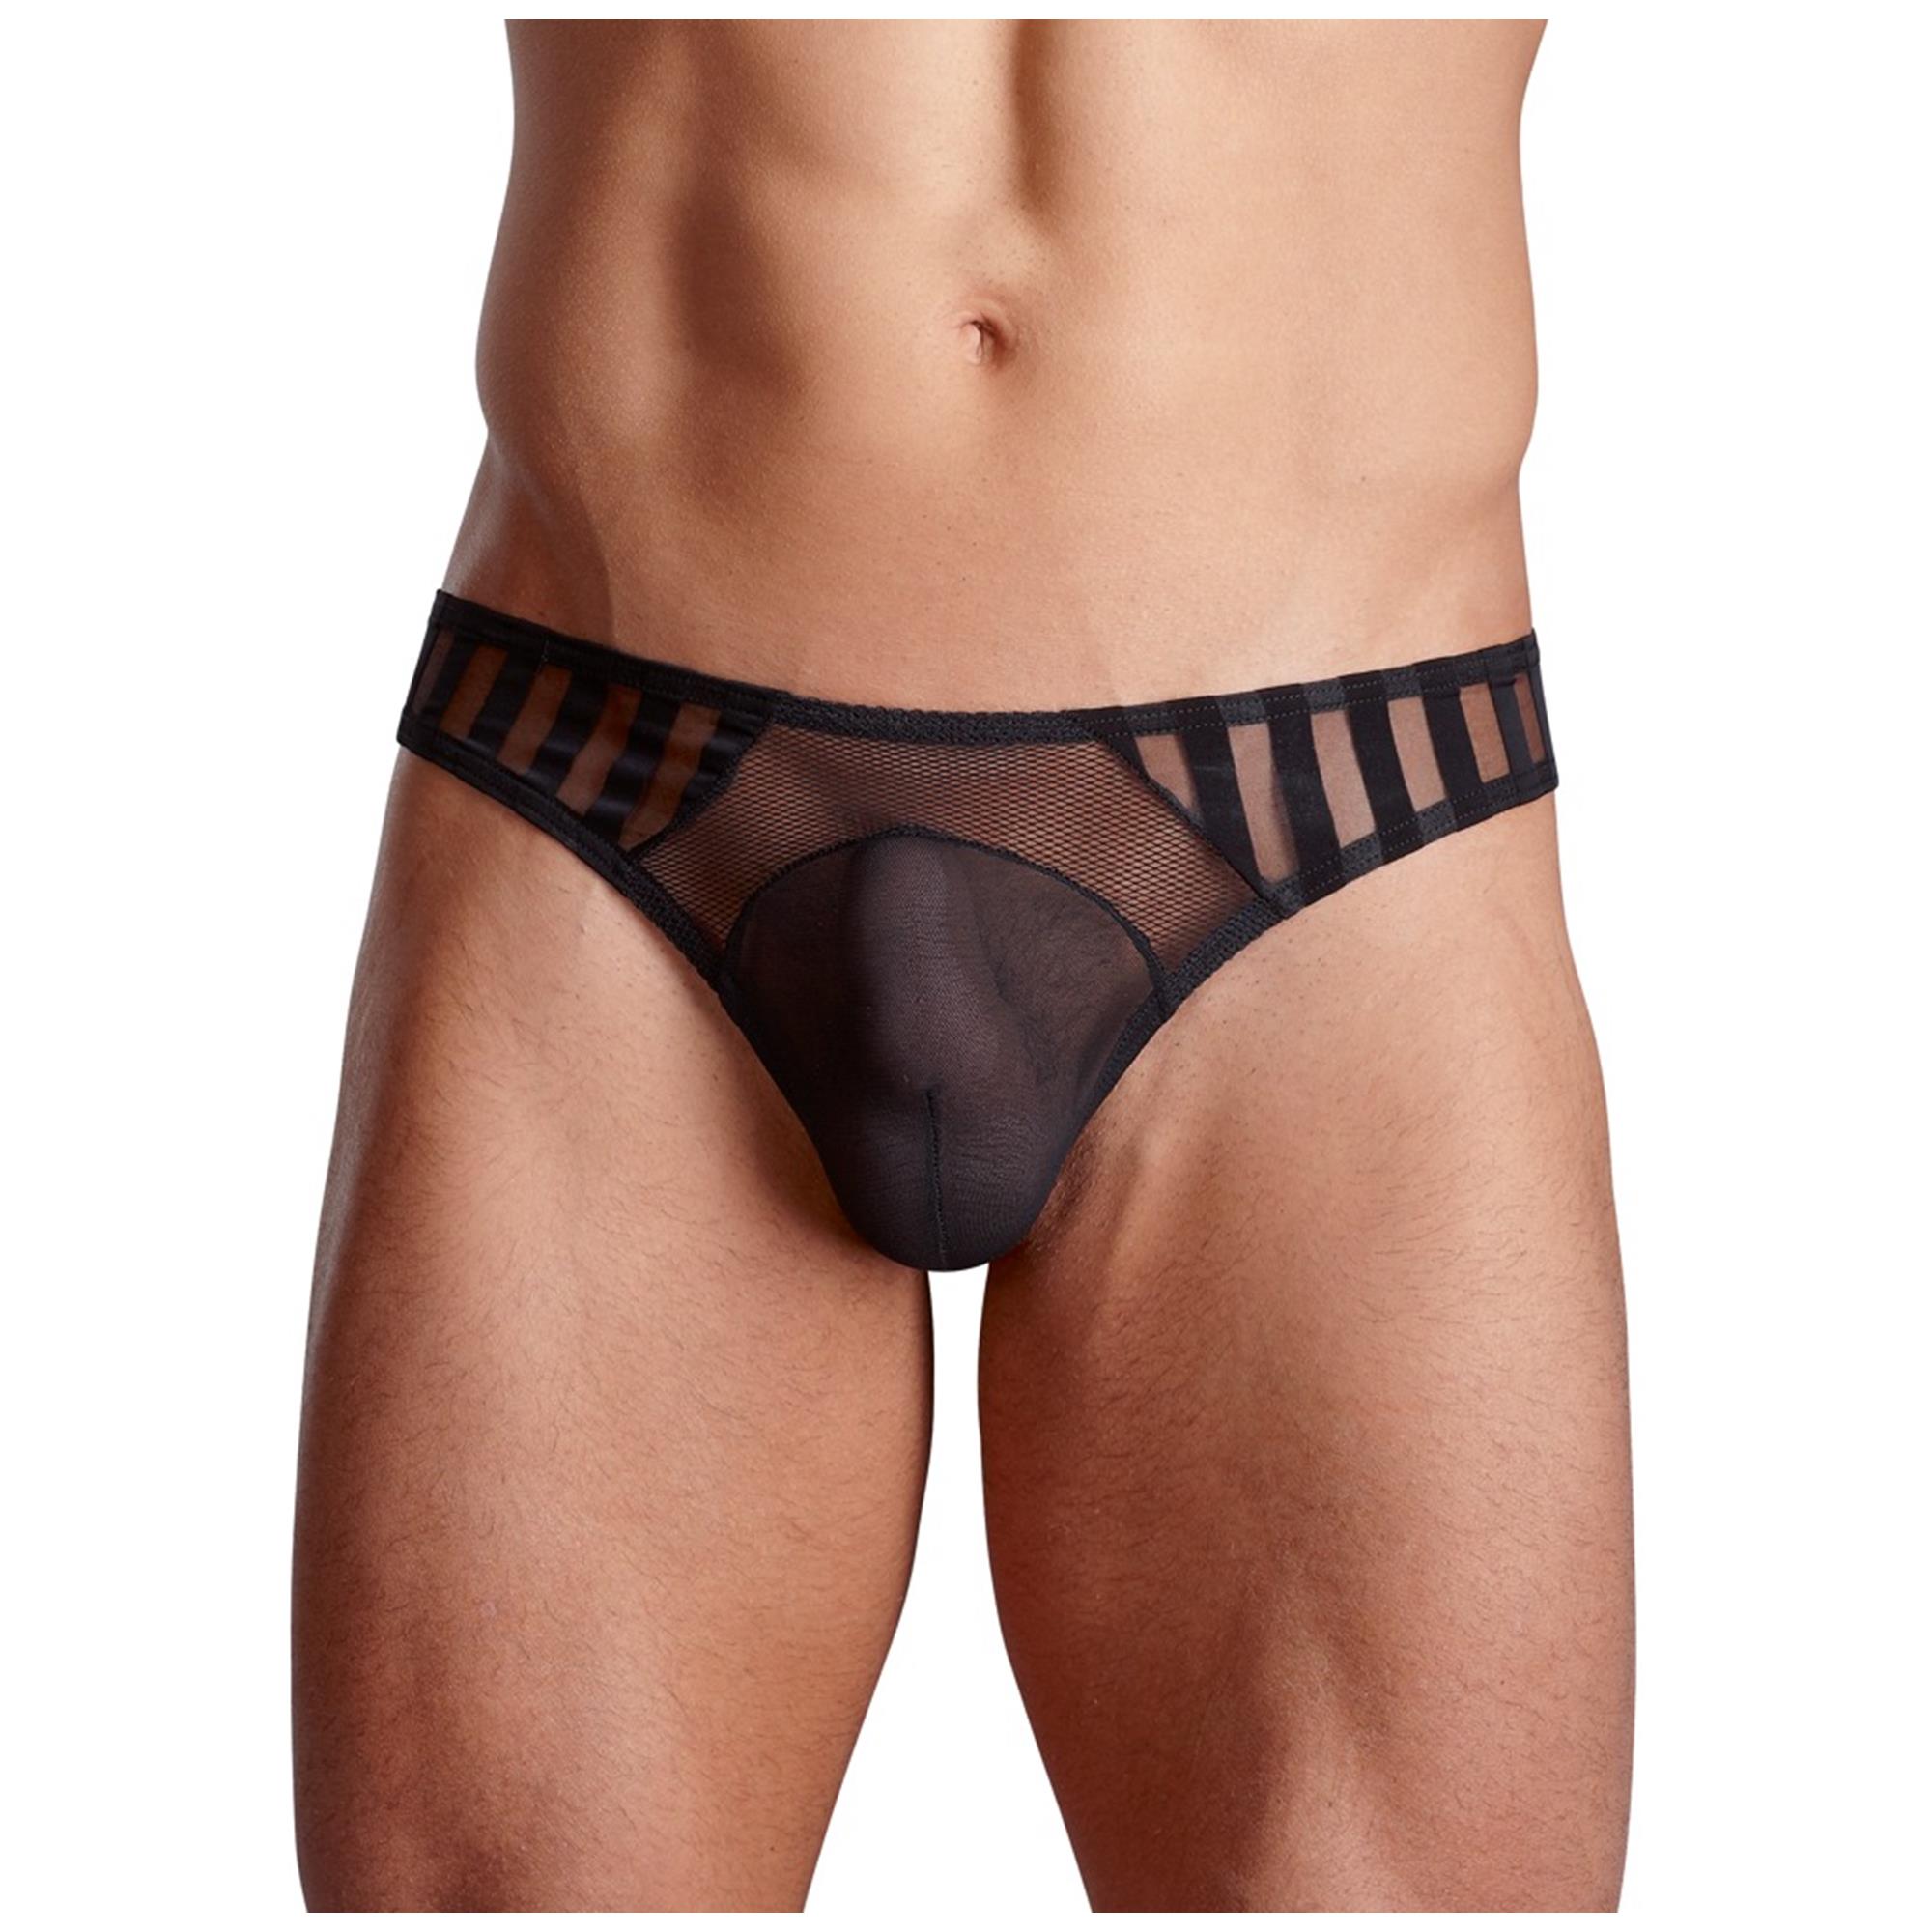 Men's String with Mesh S